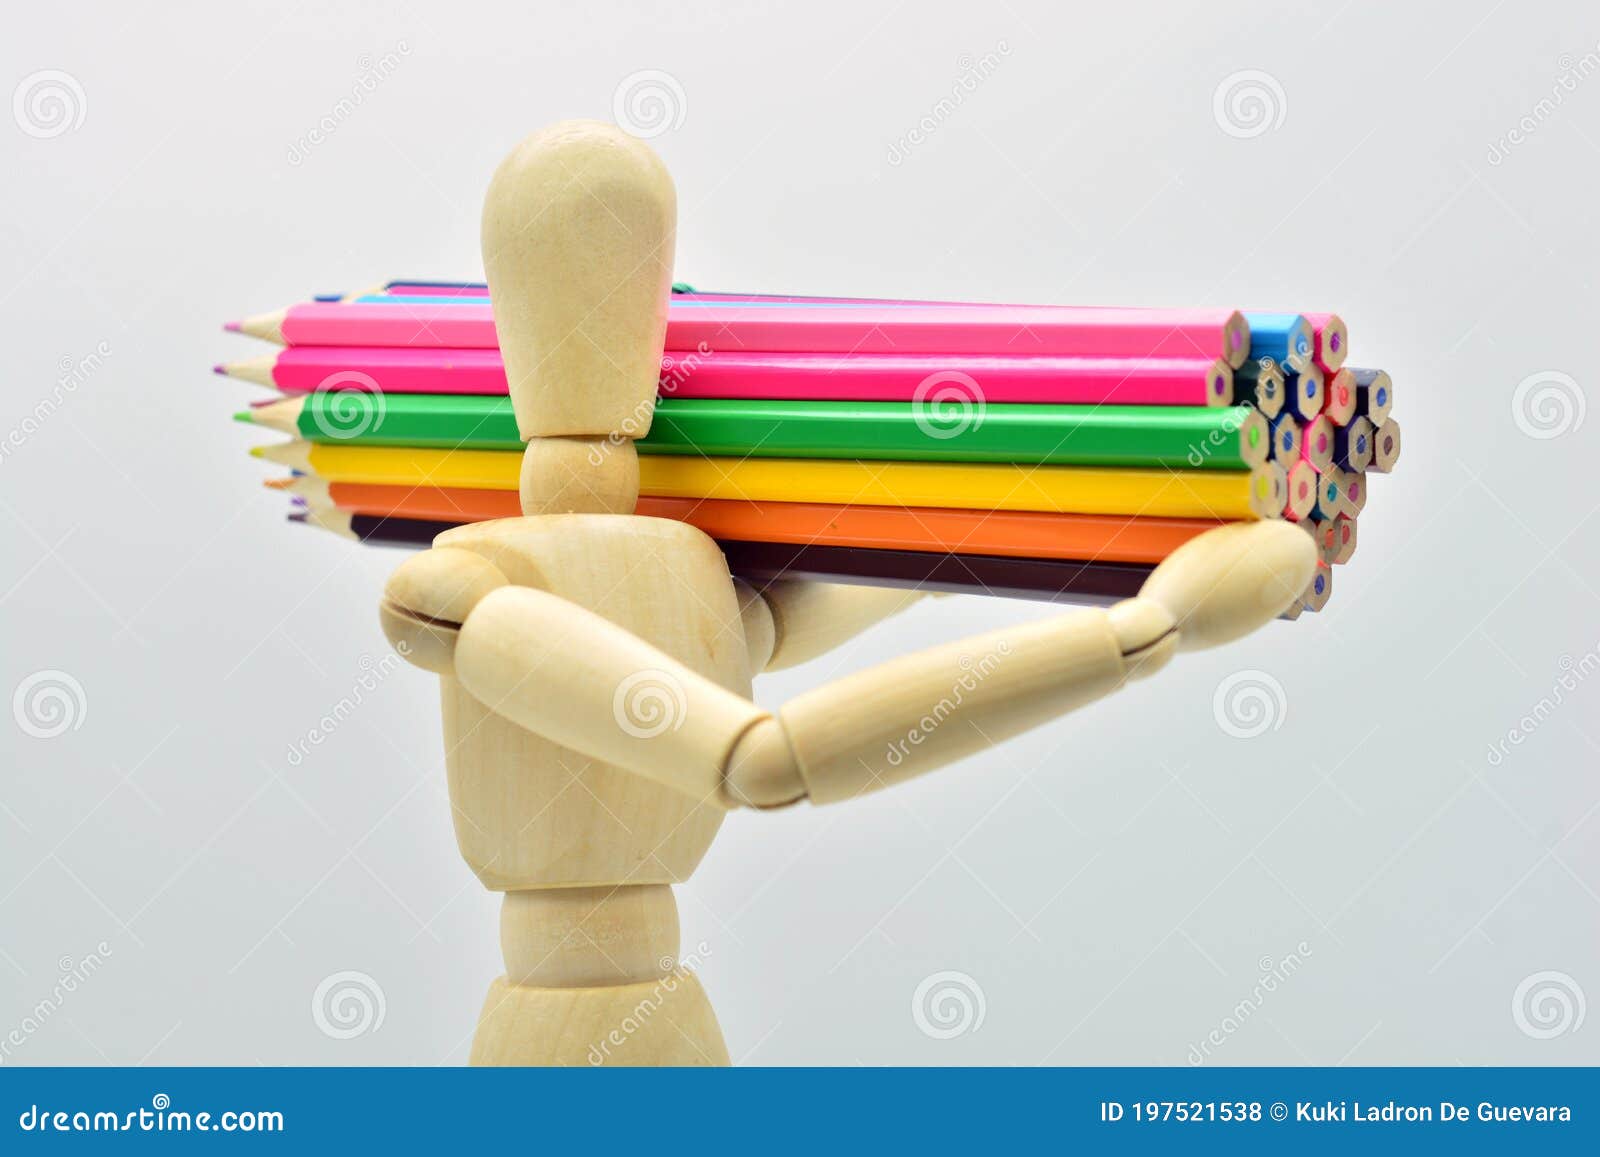 wooden mannequin loaded with colored pencils